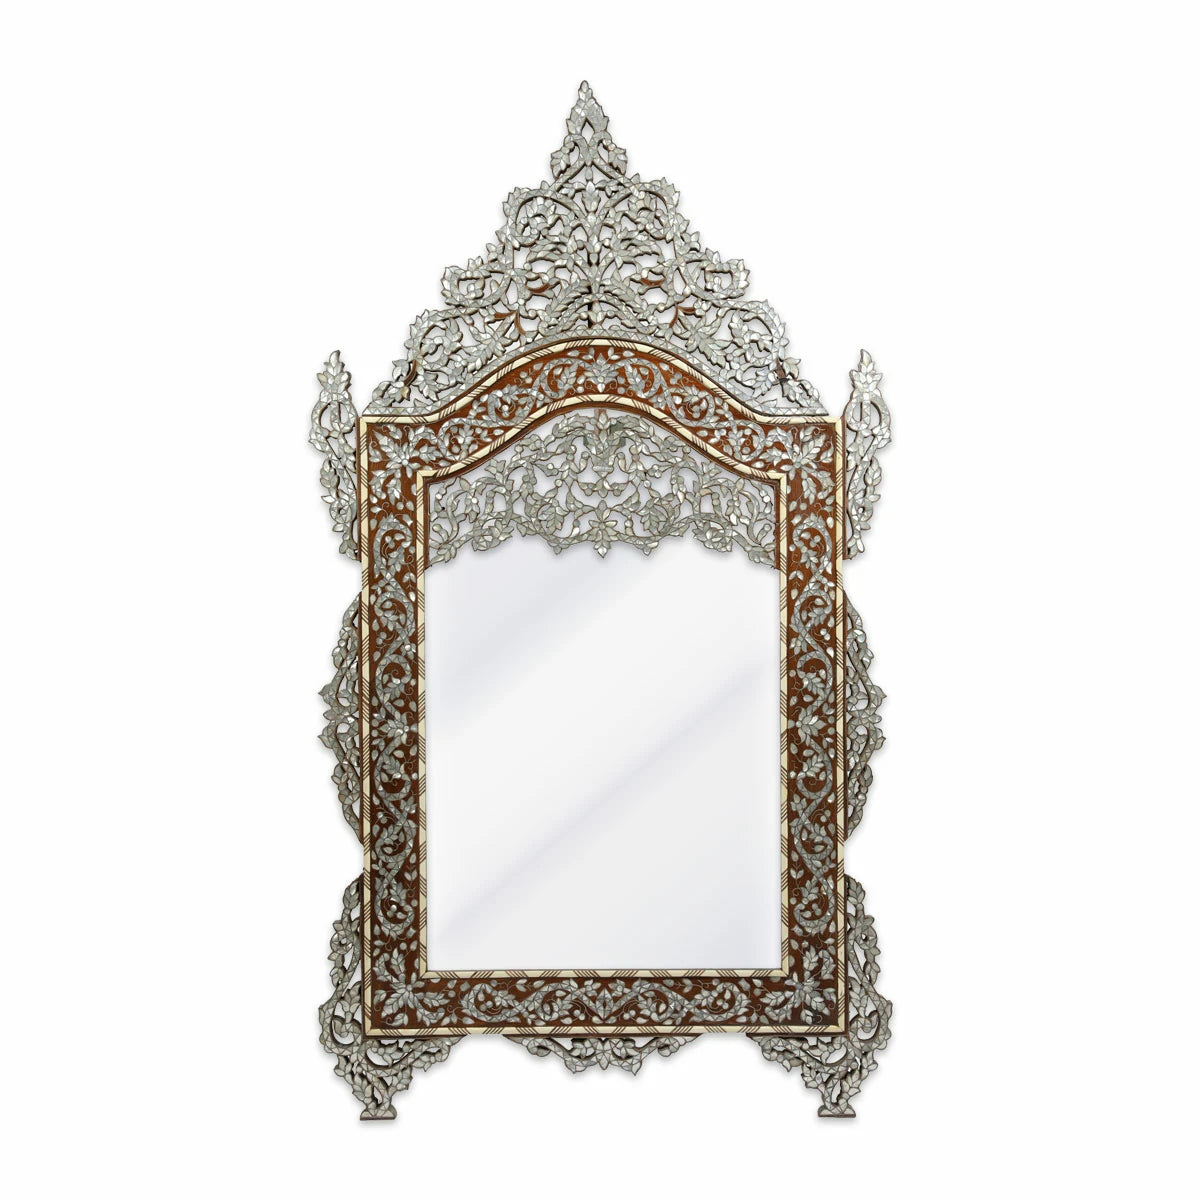 Traditional Walnut Wooden Syrian Mirror Inlaid With Mother of Pearls Camel Bone & Metallic Wiring in Ethnic Tals Method